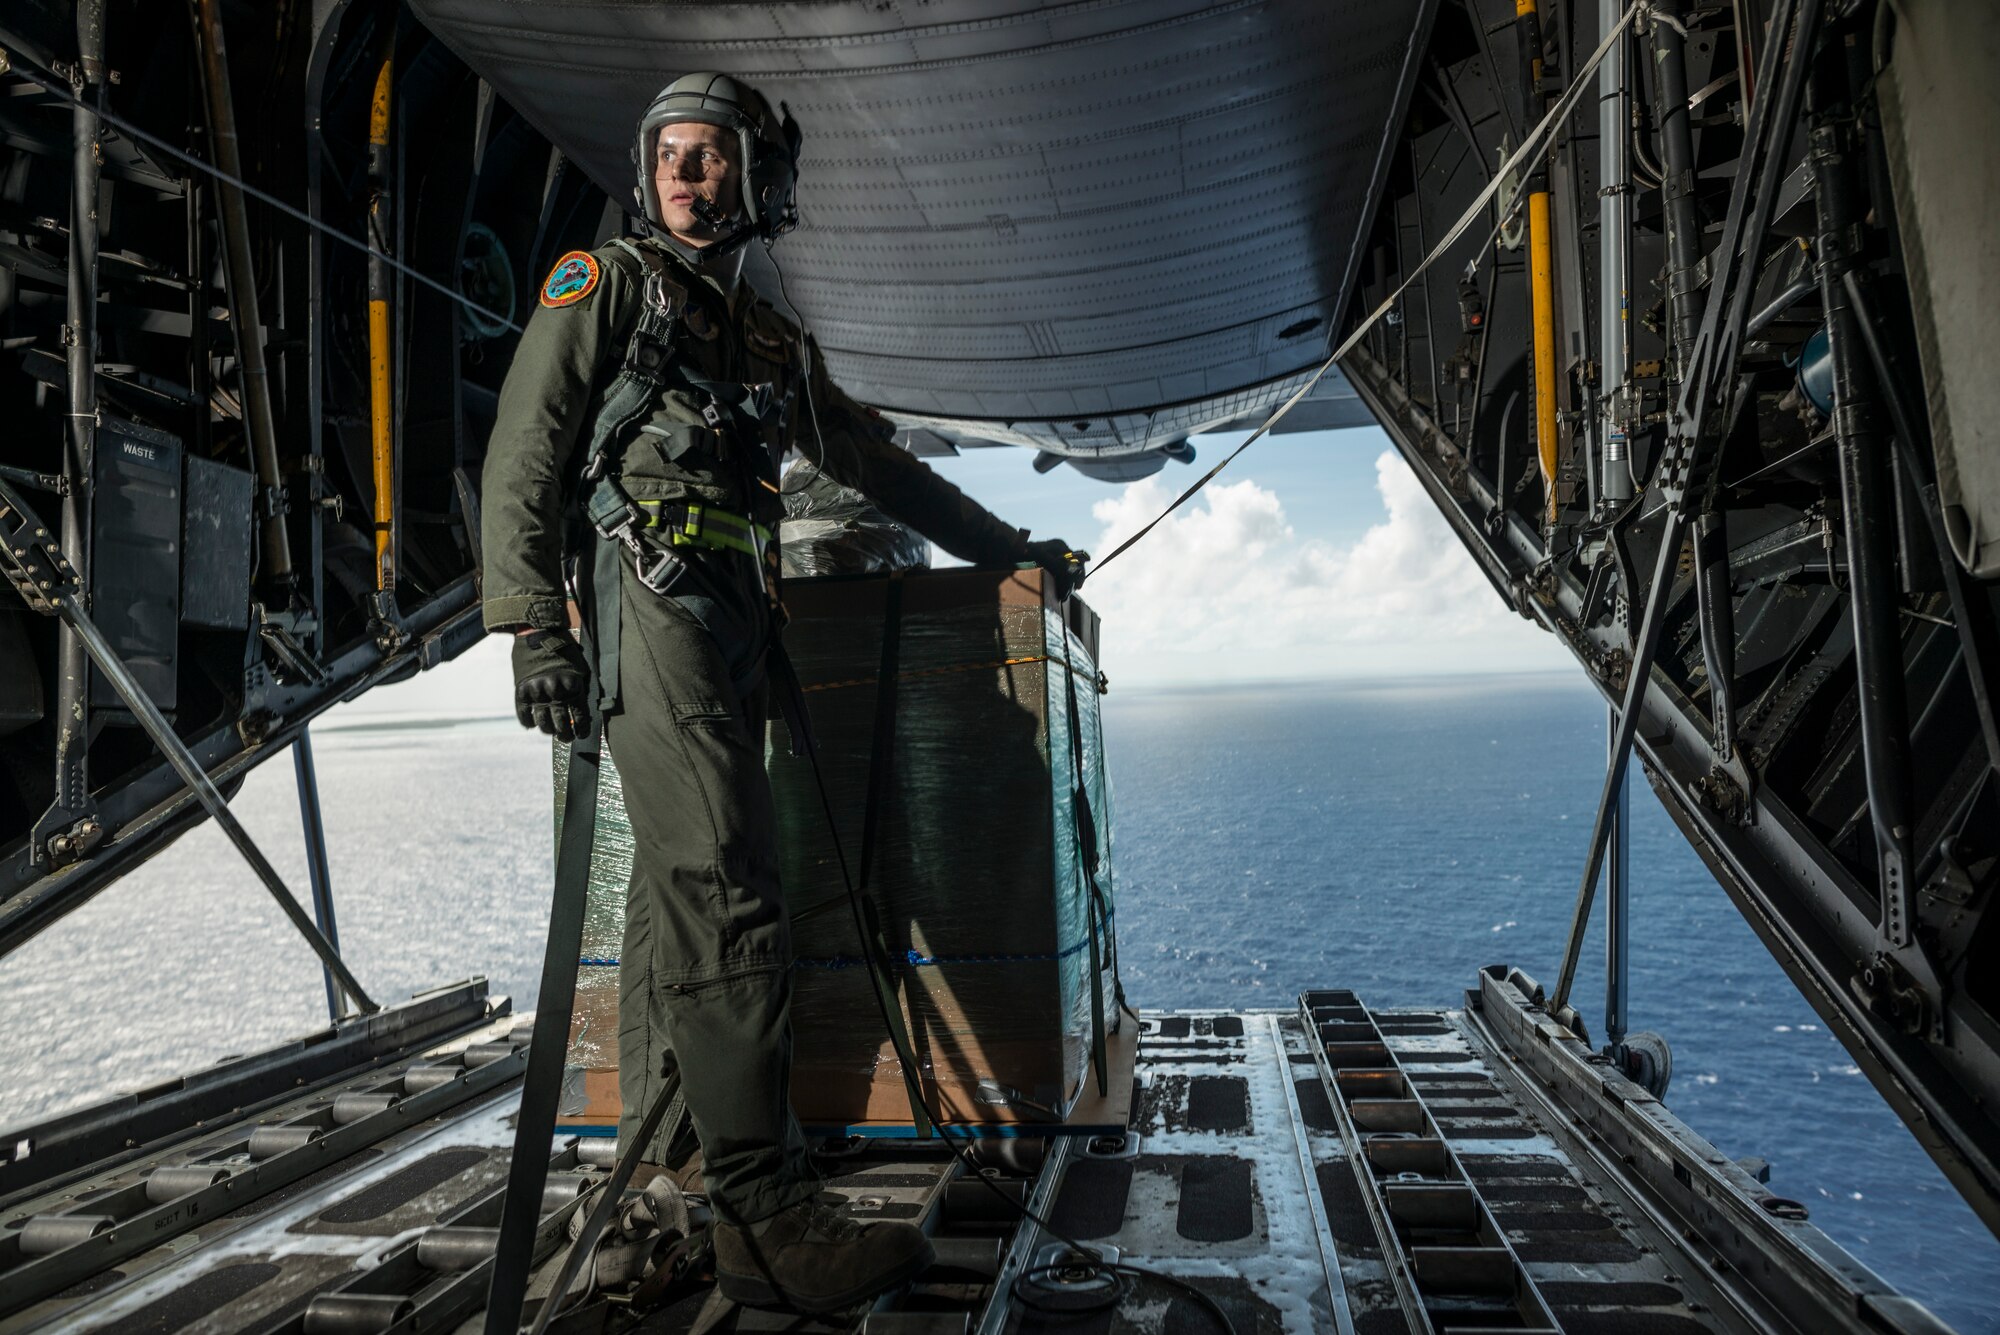 OVER THE PACIFIC OCEAN -- Senior Airman Timothy Oberman, 36th Airlift Squadron loadmaster, waits to drop a bundle of humanitarian aid during Operation Christmas Drop, Dec. 13, 2012. Timing is essential for low-cost, low-altitude air drops, often offering a window of only one or two seconds for the navigator to tell the loadmaster to drop the bundle once the drop zone is reached. (U.S. Air Force photo by Tech. Sgt. Samuel Morse)